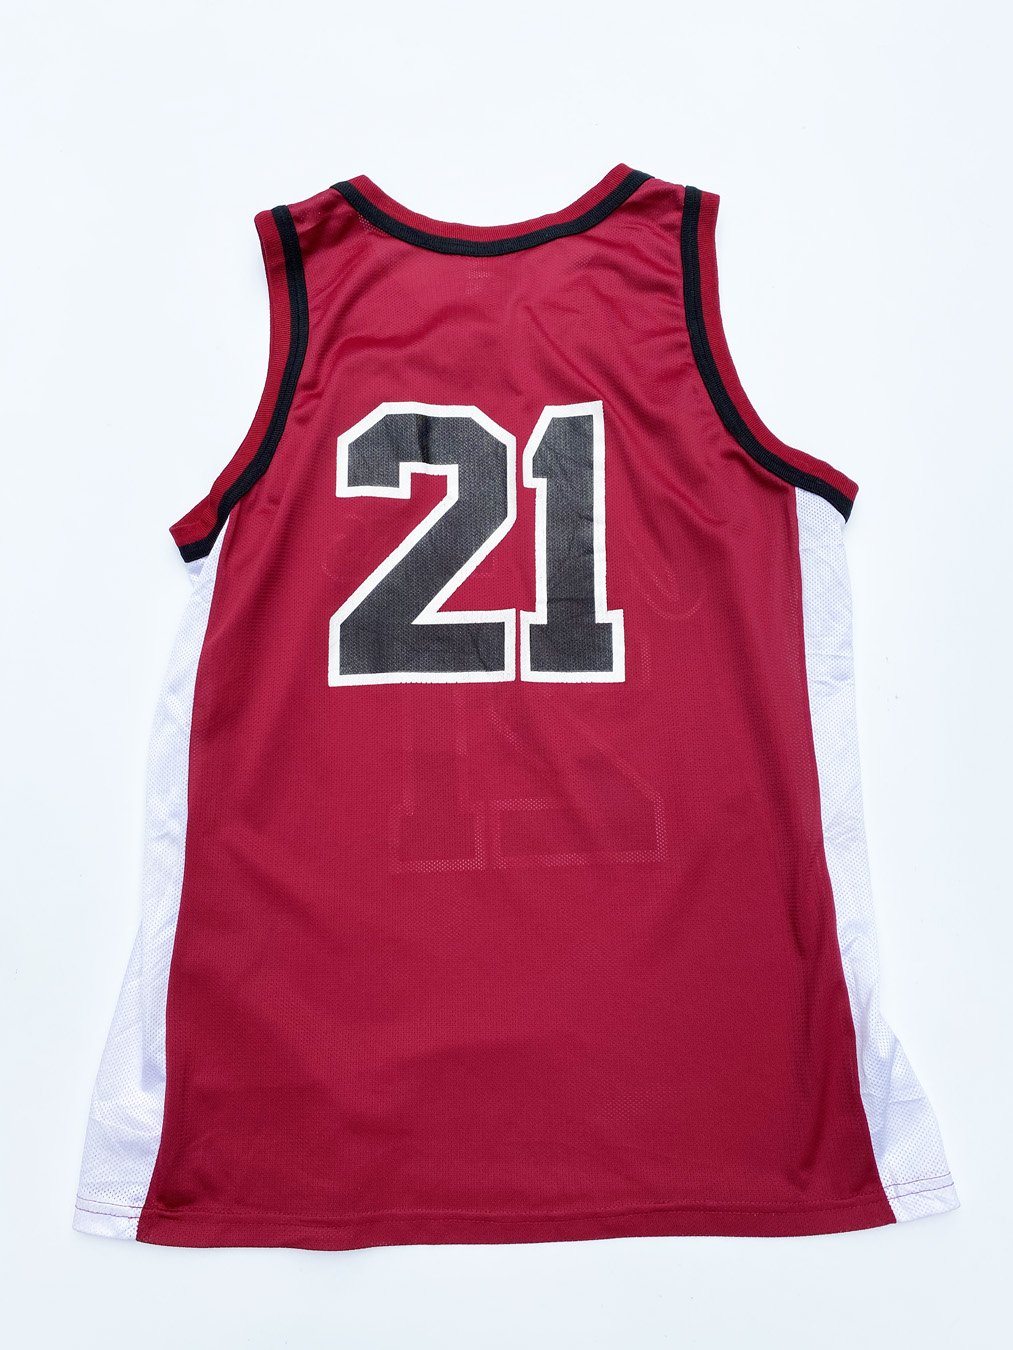 VINTAGE MARCUS CAMBY JERSEY - MAROON